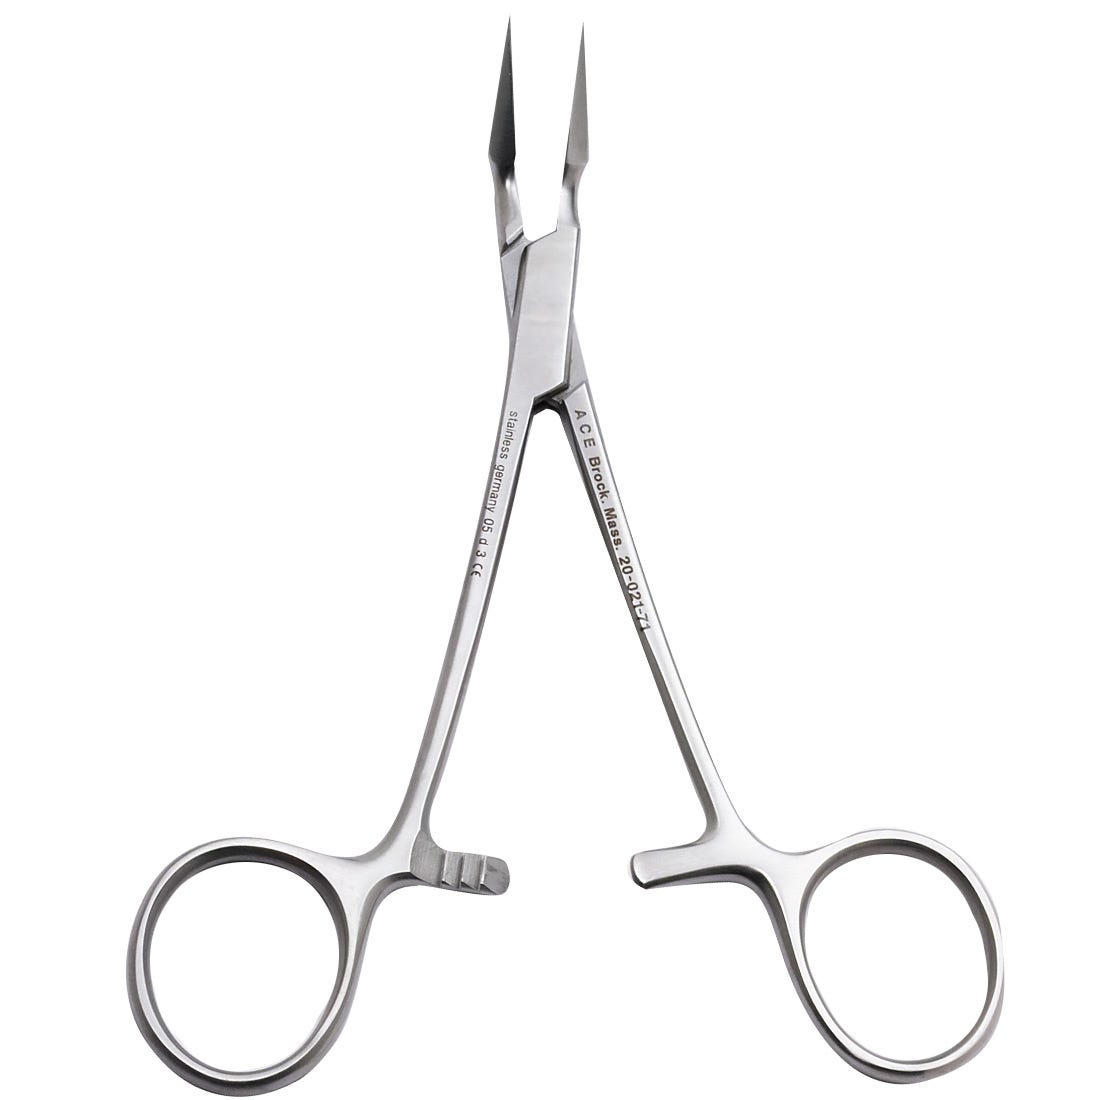 ACE Steiglitz Root Forceps, 45 degree Angle